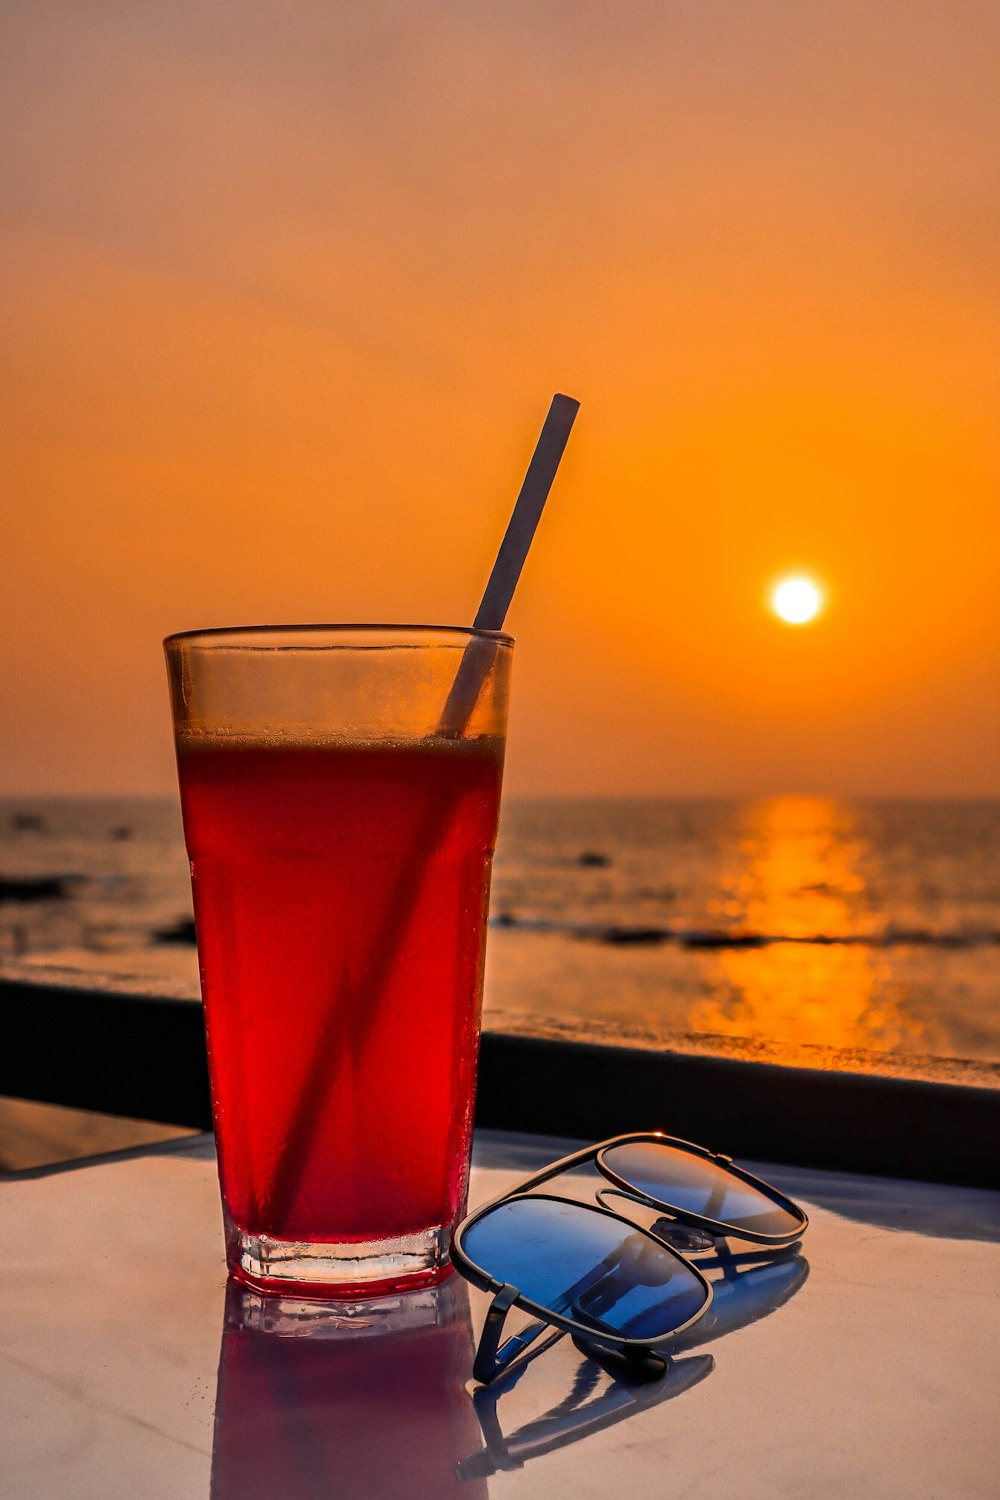 a drink and sunglasses on a table near the ocean